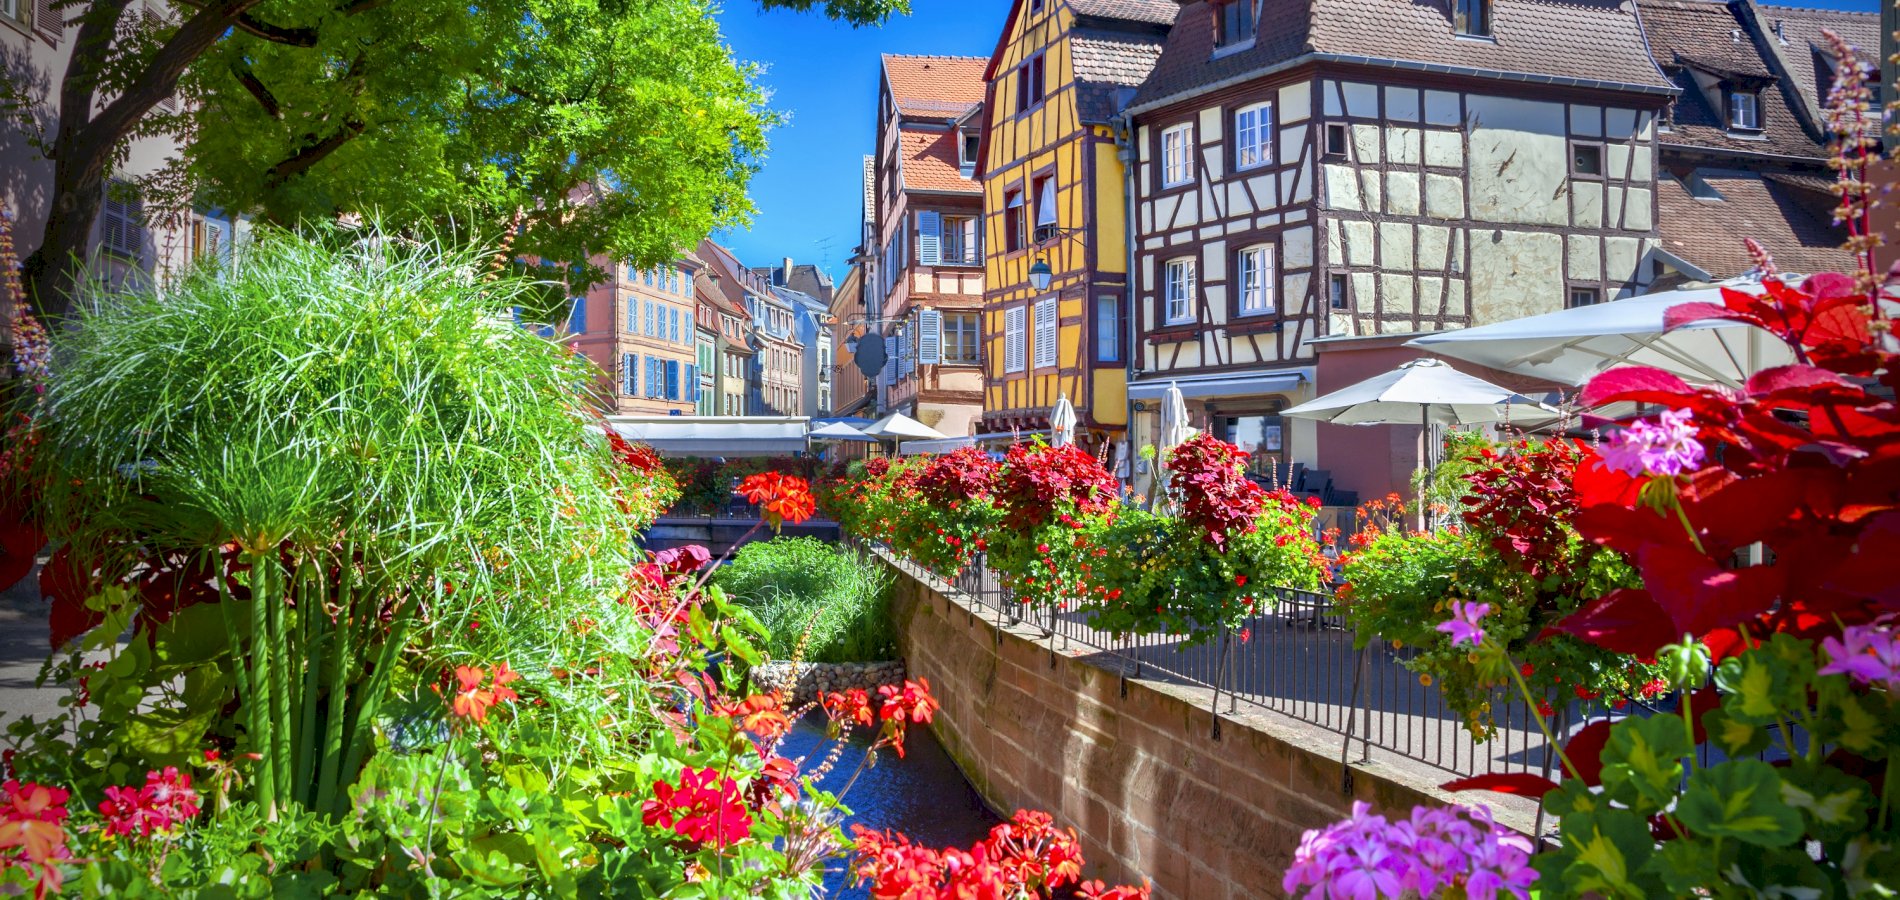 Ophorus Tours - 4 Days Small Group Alsace Travel Package - Strasbourg - 5* Hotel